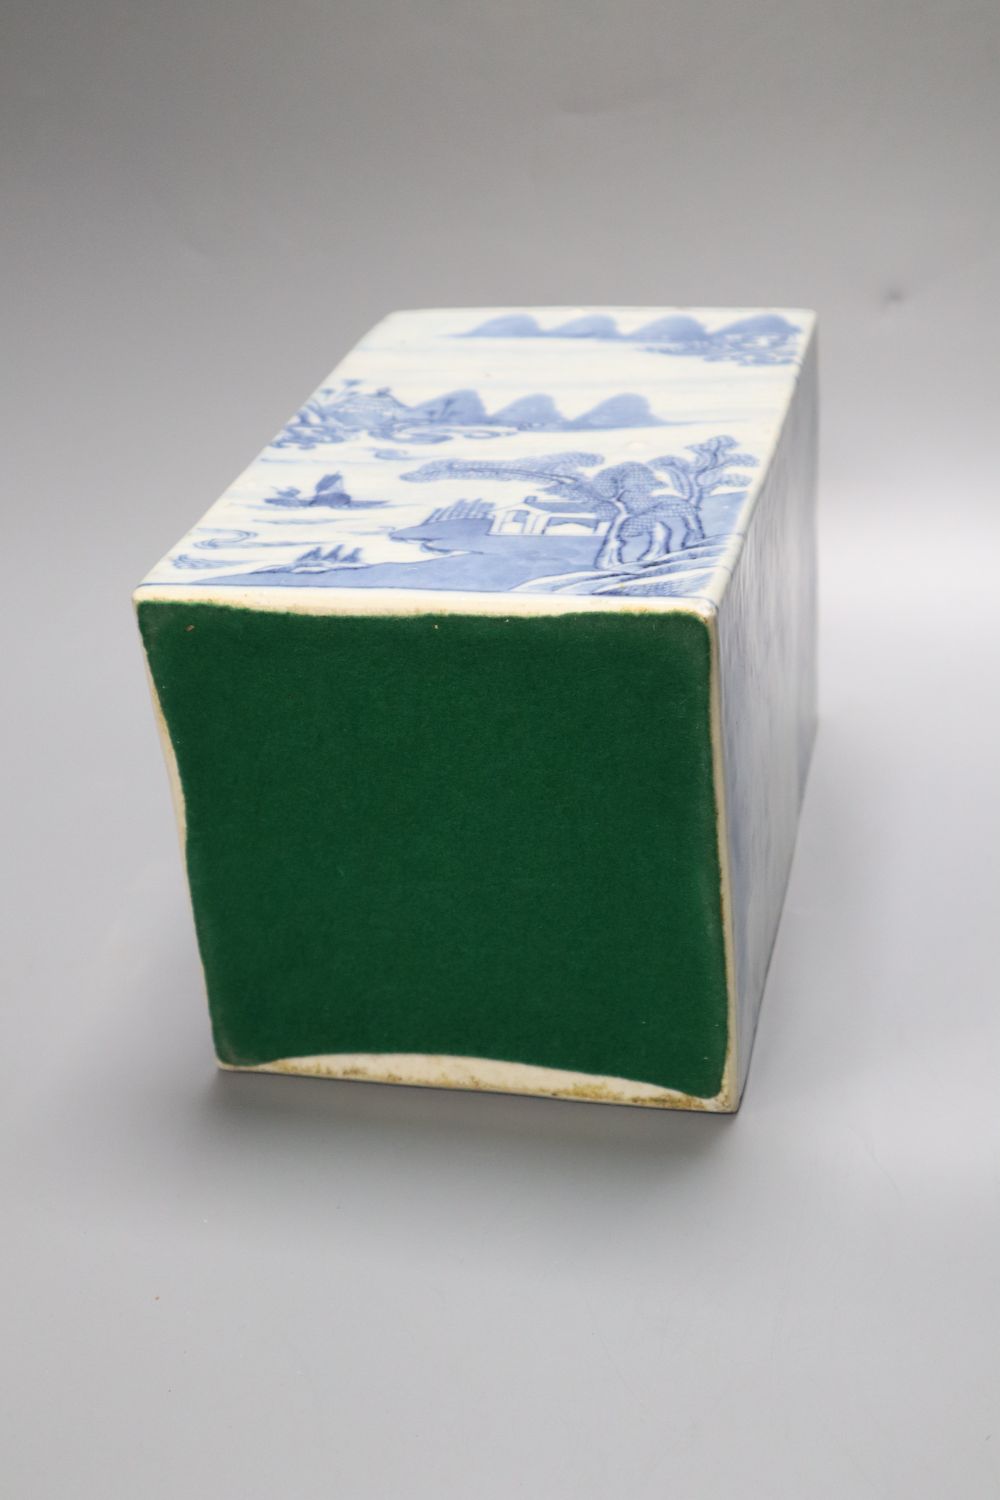 A 19th century Chinese blue and white oblong tea canister, painted in underglaze blue, 28cm